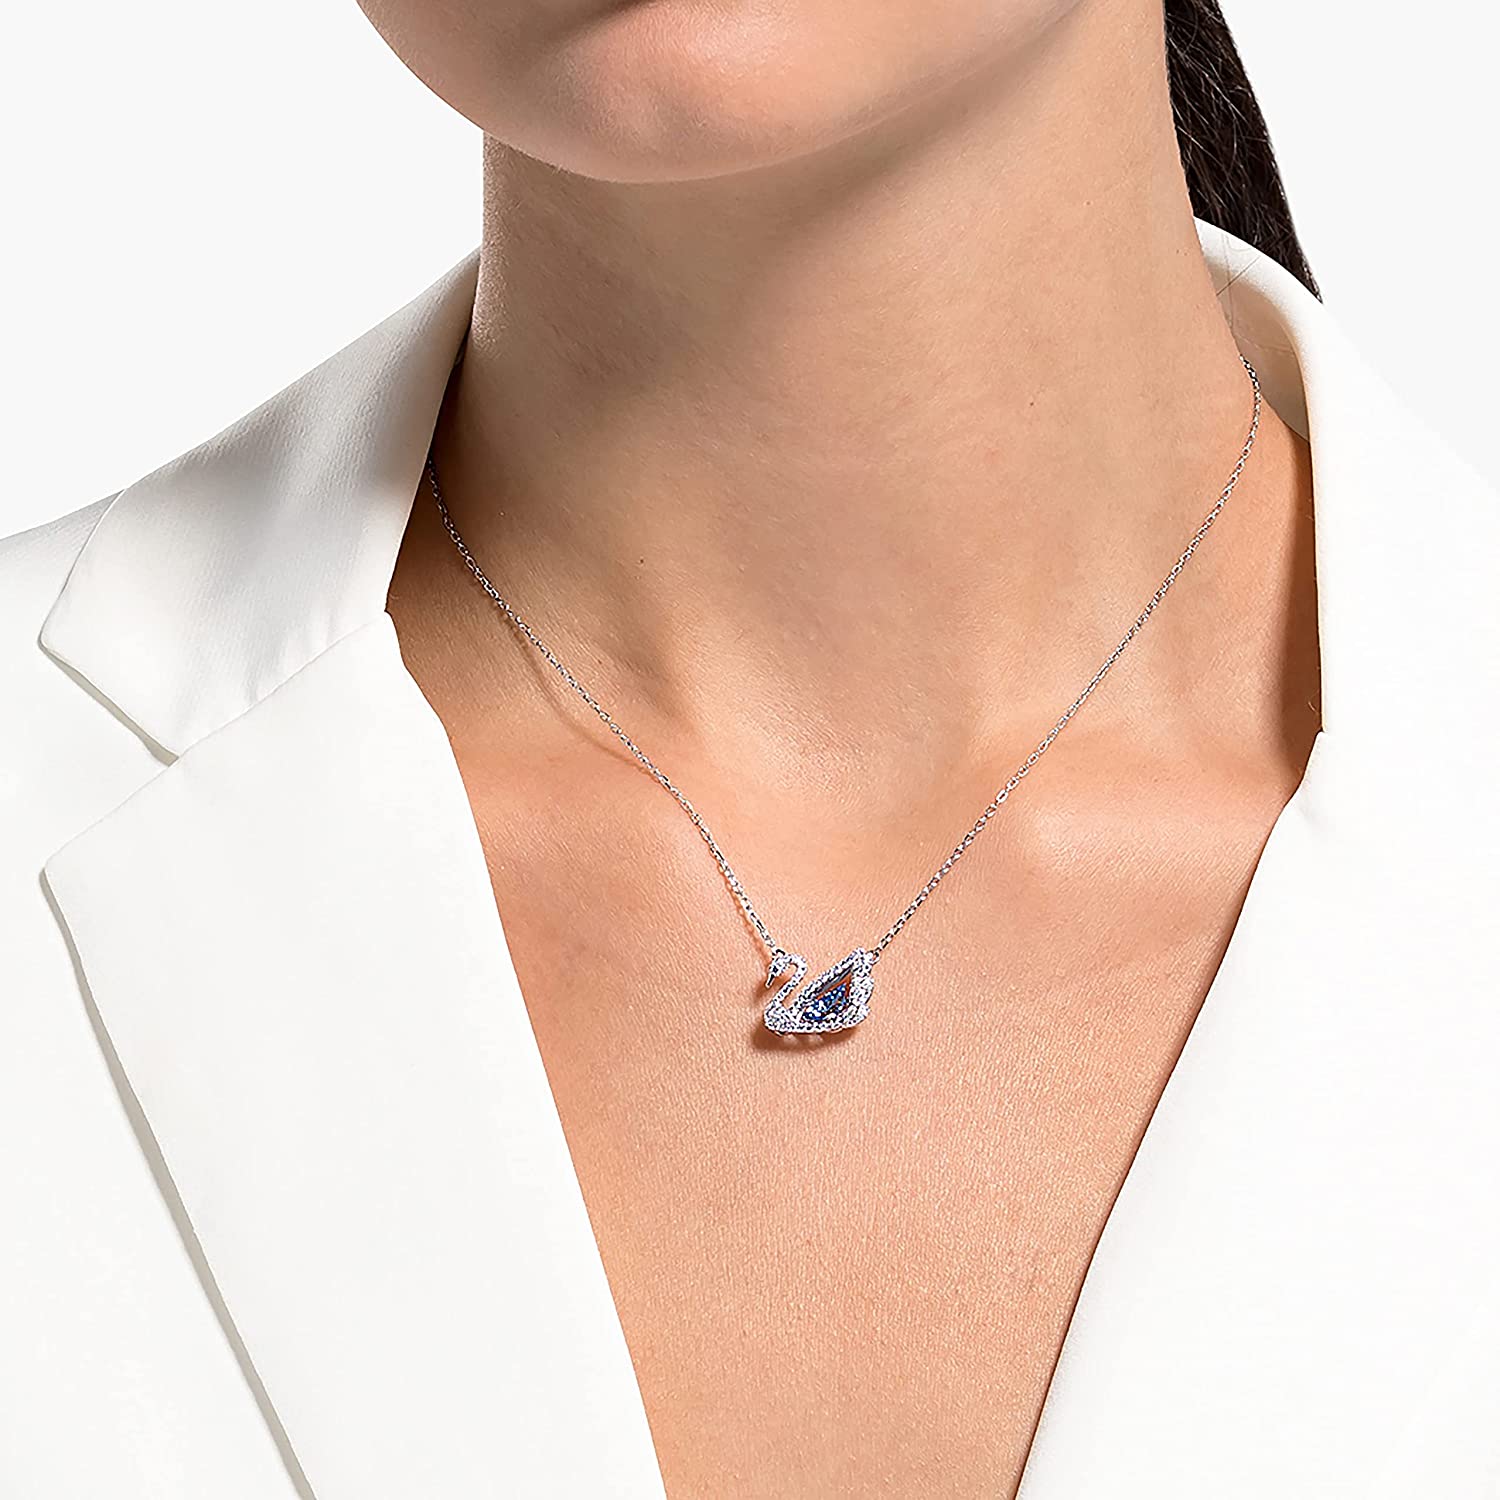 DÂY CHUYỀN NỮ DANCING SWAN NECKLACE, BLUE, RHODIUM PLATED 10